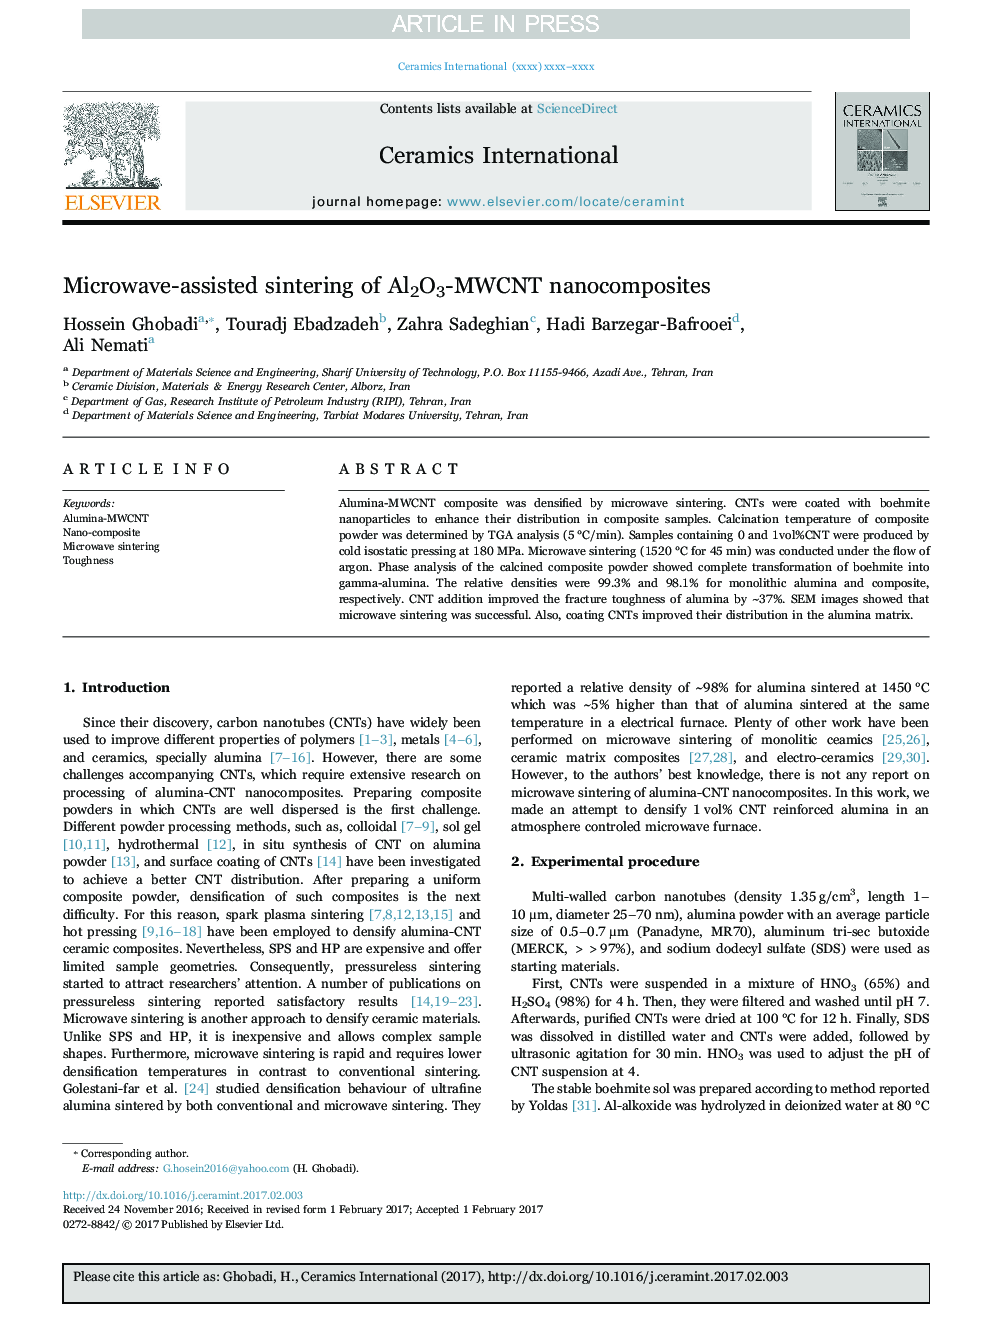 Microwave-assisted sintering of Al2O3-MWCNT nanocomposites